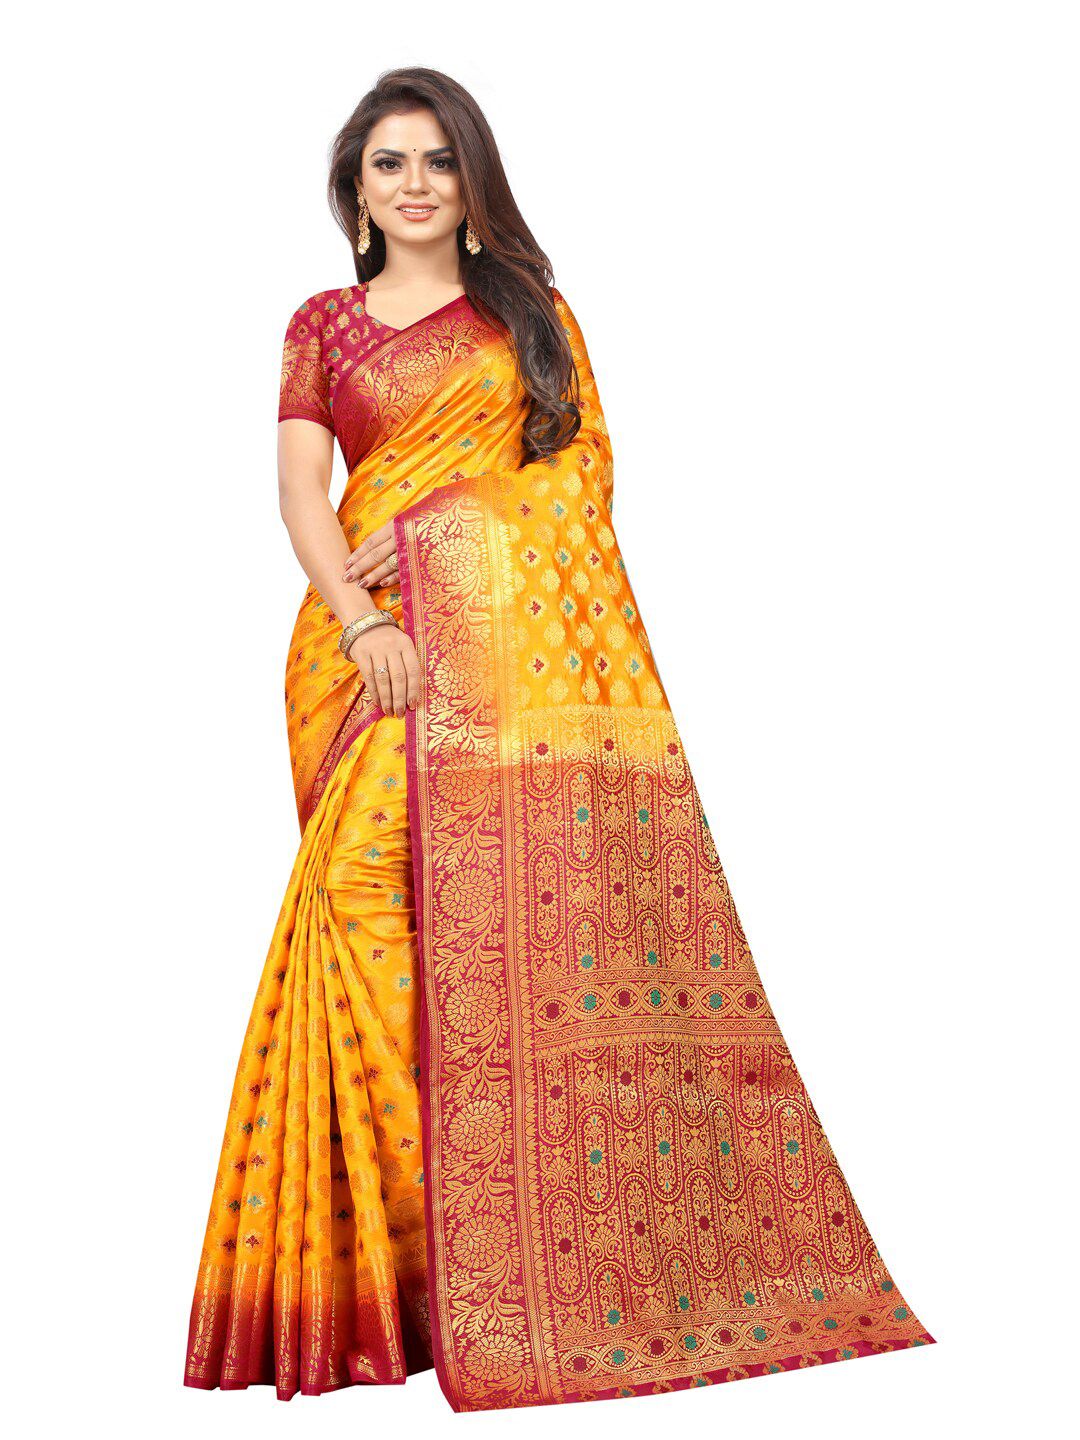 PERFECT WEAR Yellow & Red Woven Design Silk Cotton Saree Price in India